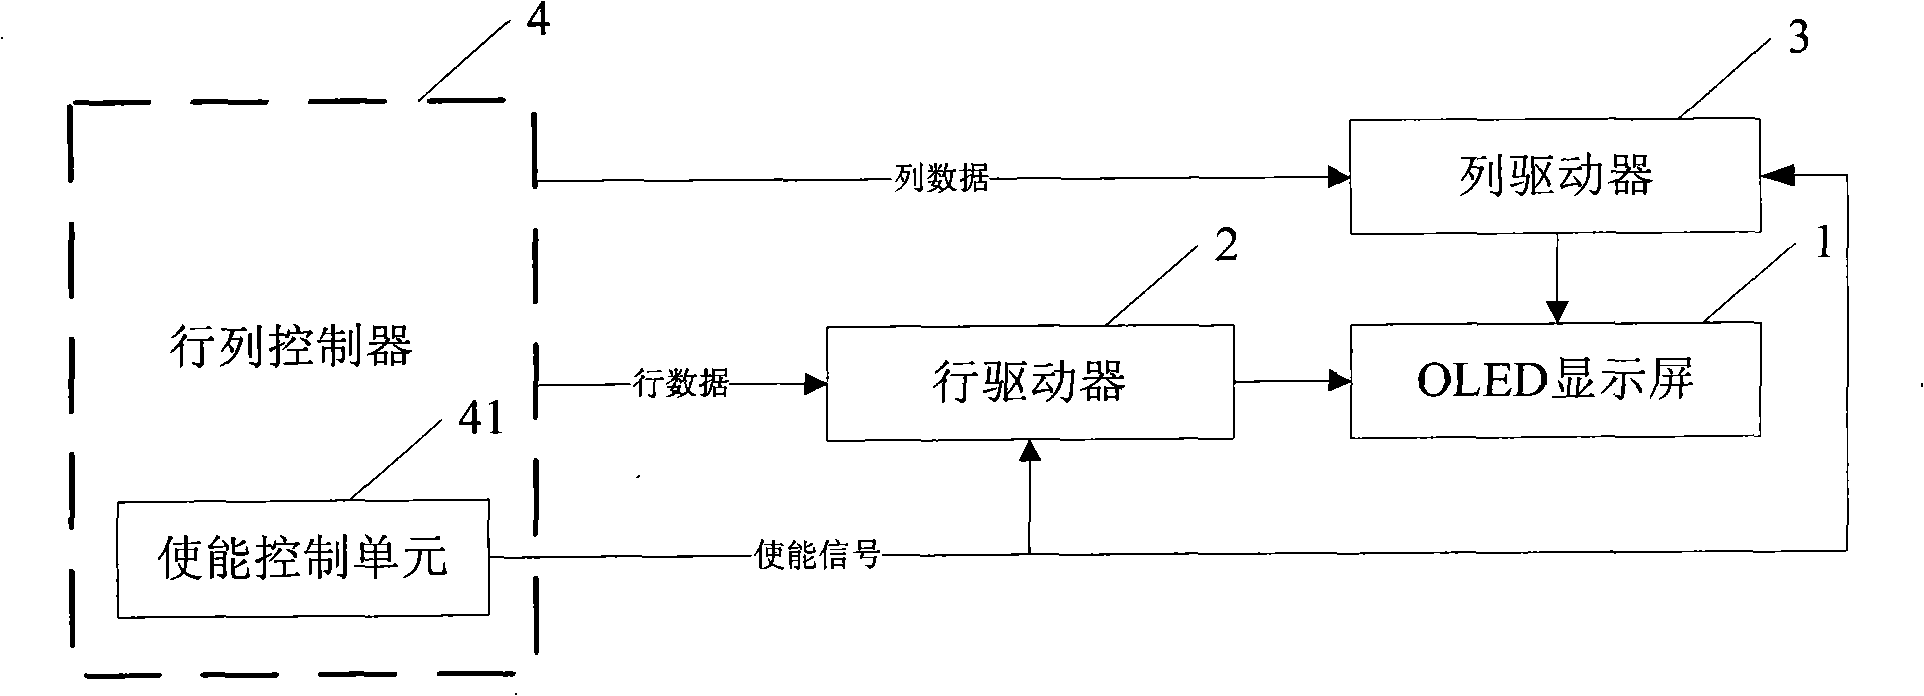 OLED display control device and method